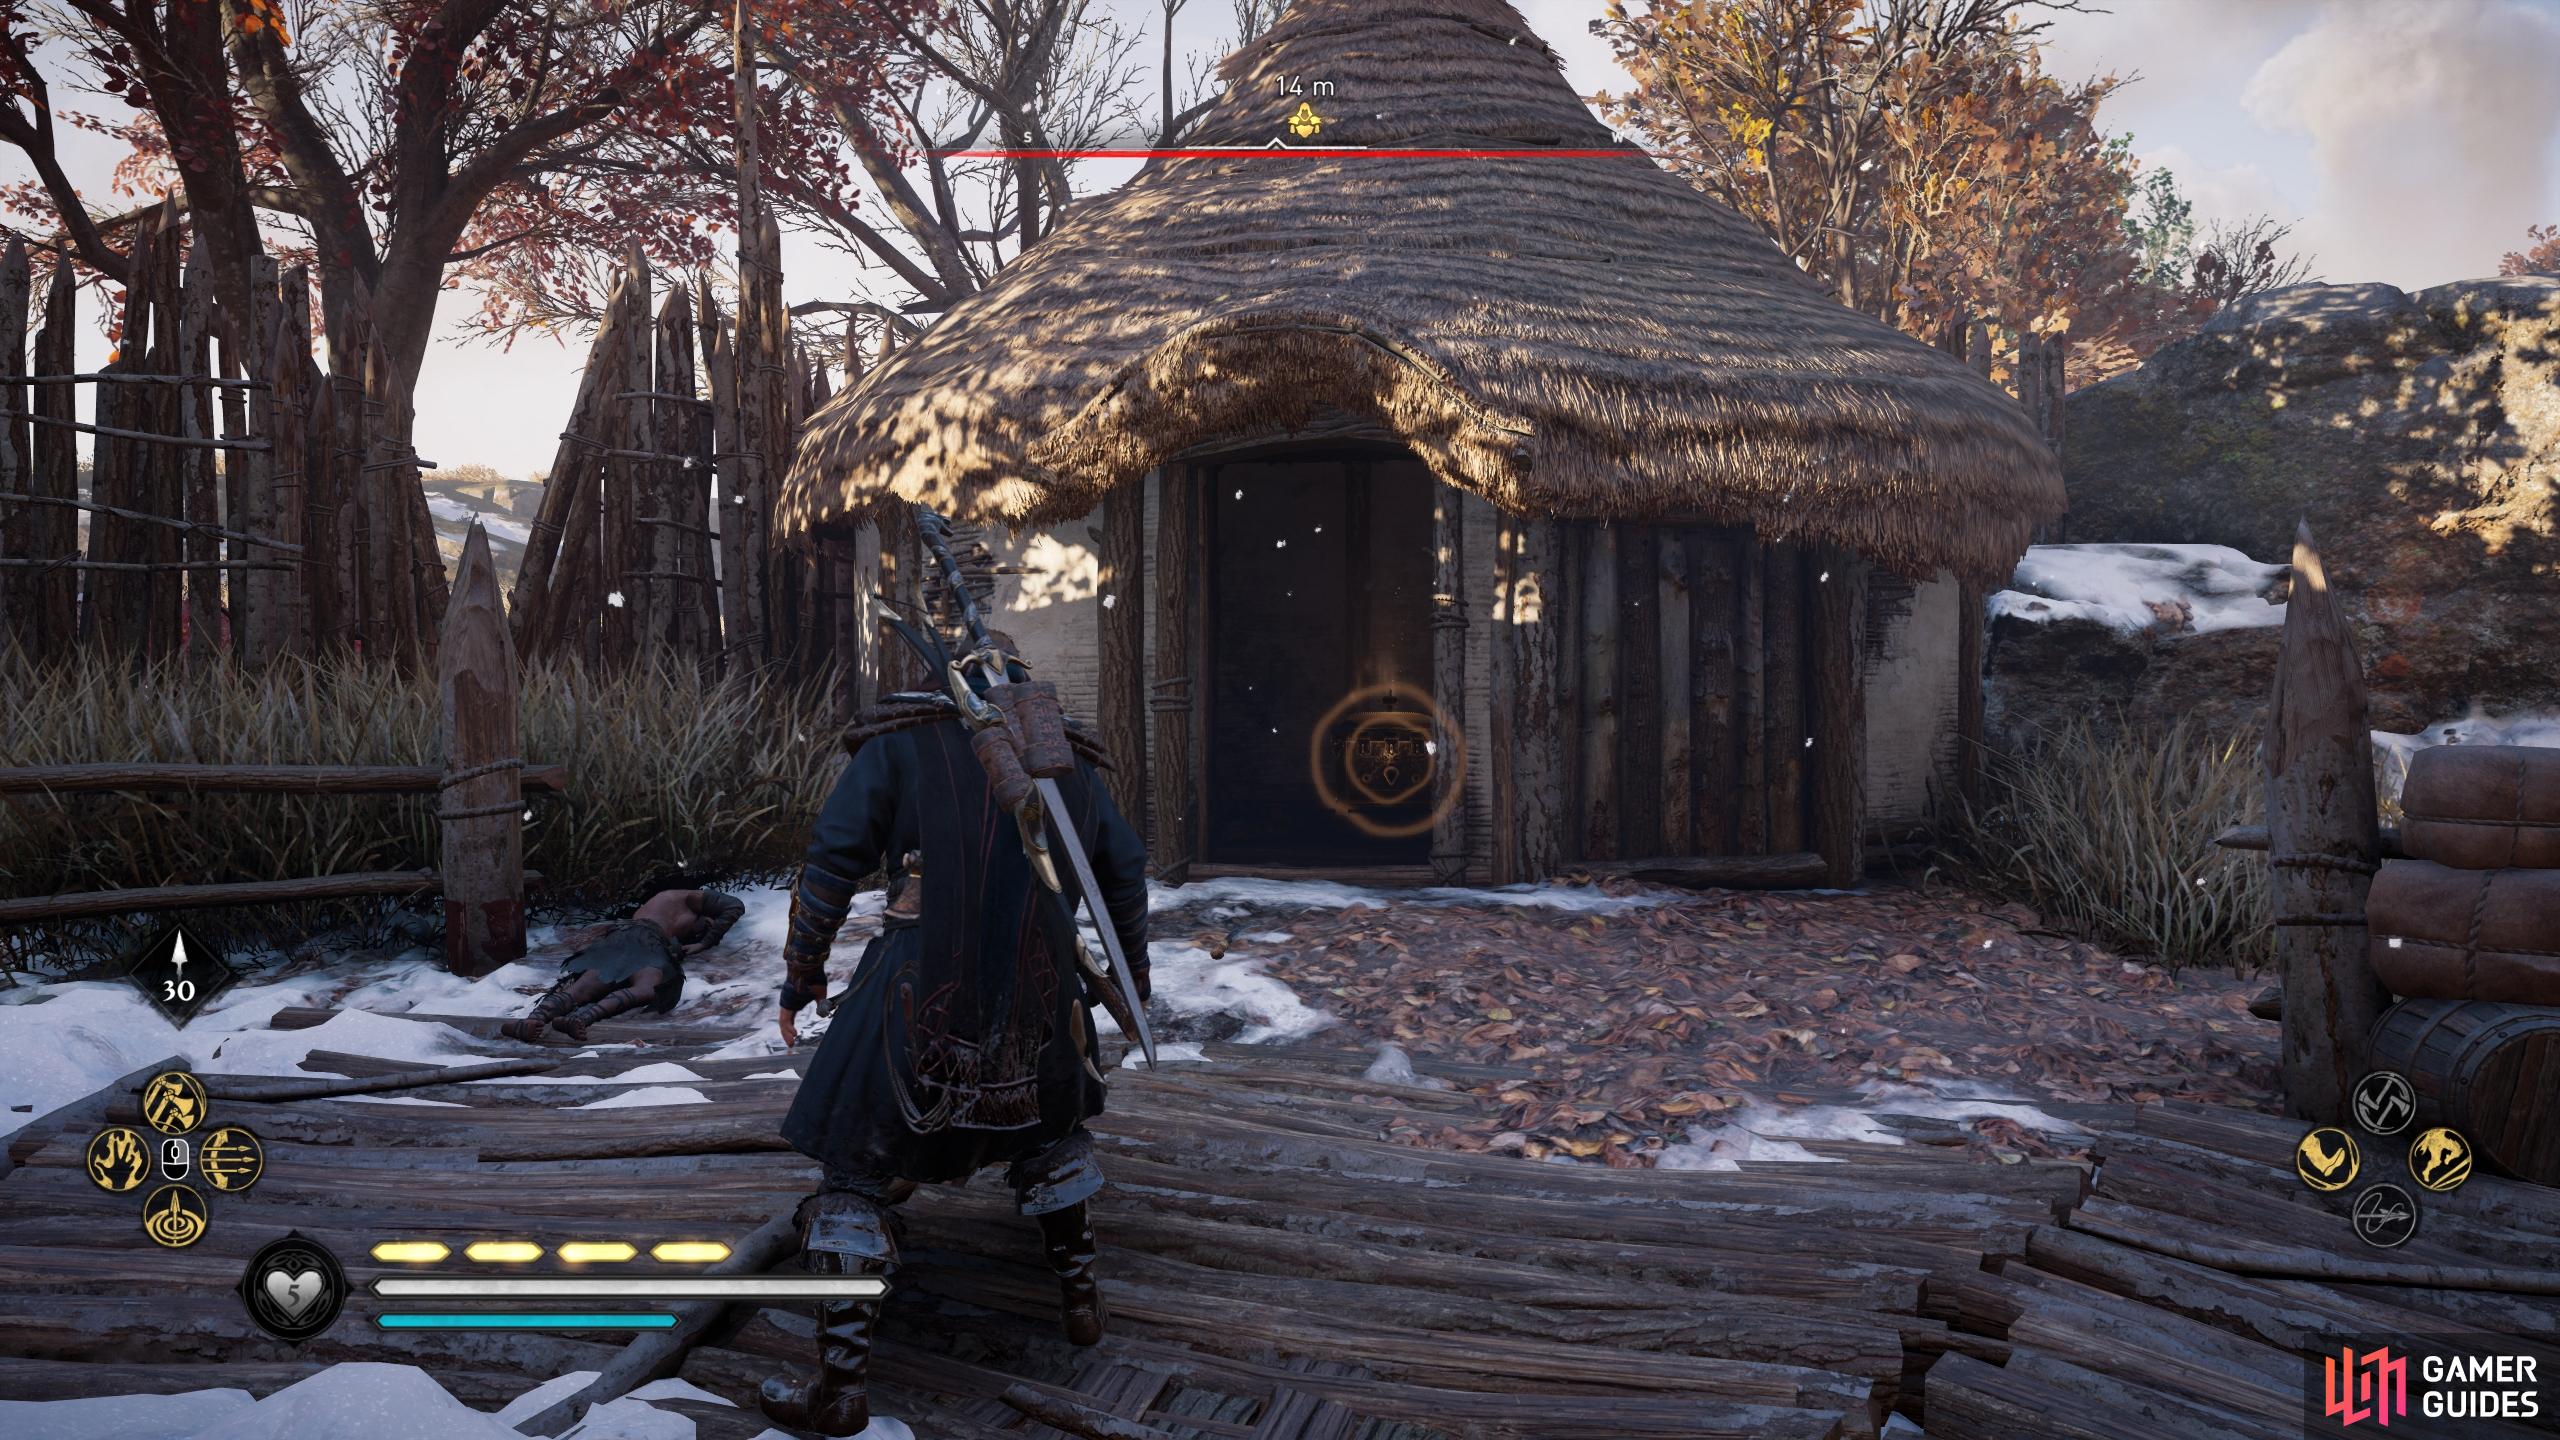 You'll find the roundhouse with the chest inside at the southwestern side of the hideout.